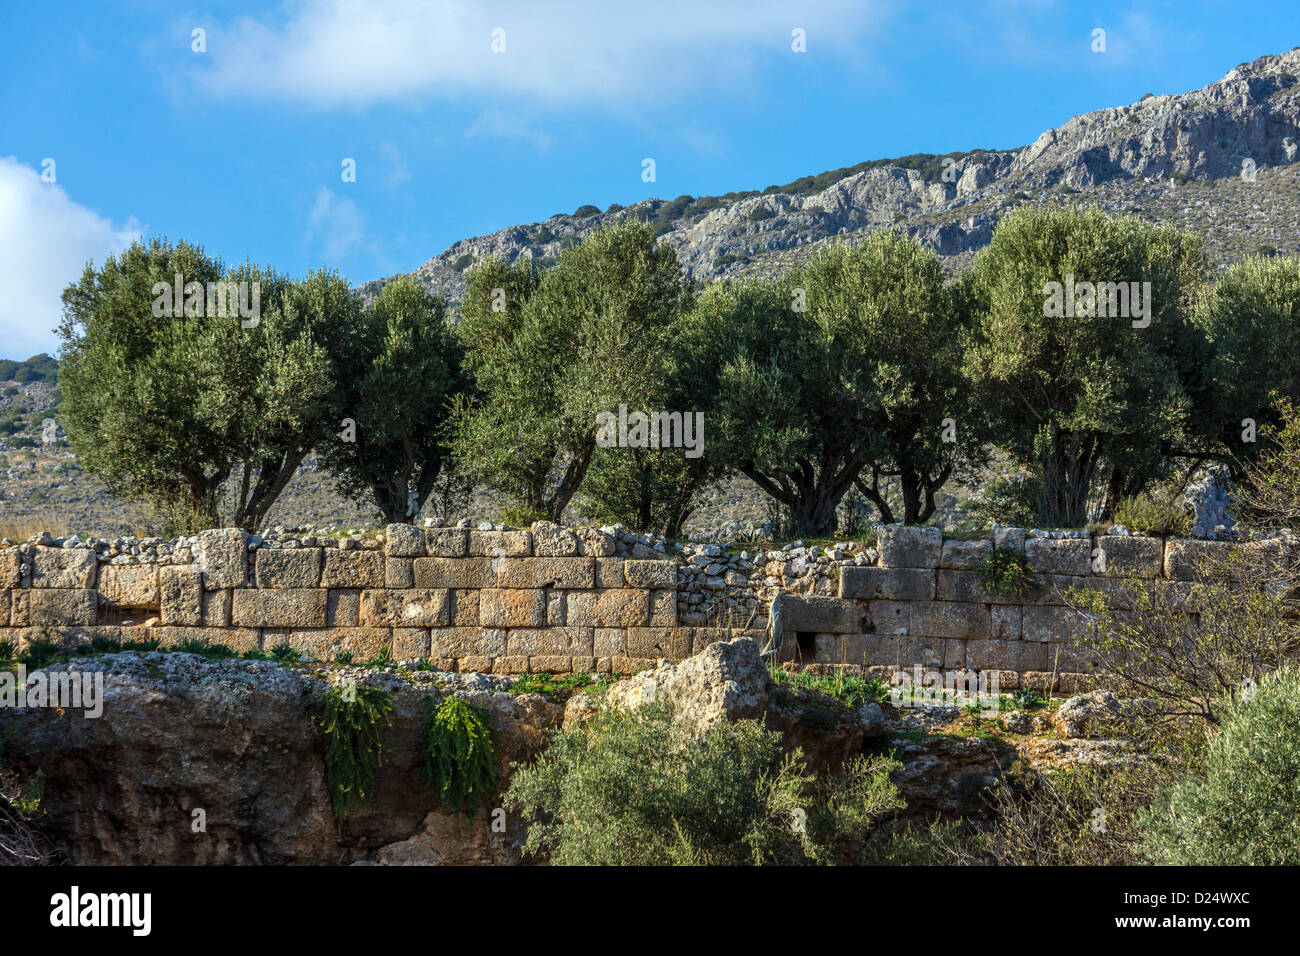 Ancient walls and olive trees, Vathy, Kalymnos, Greece Stock Photo